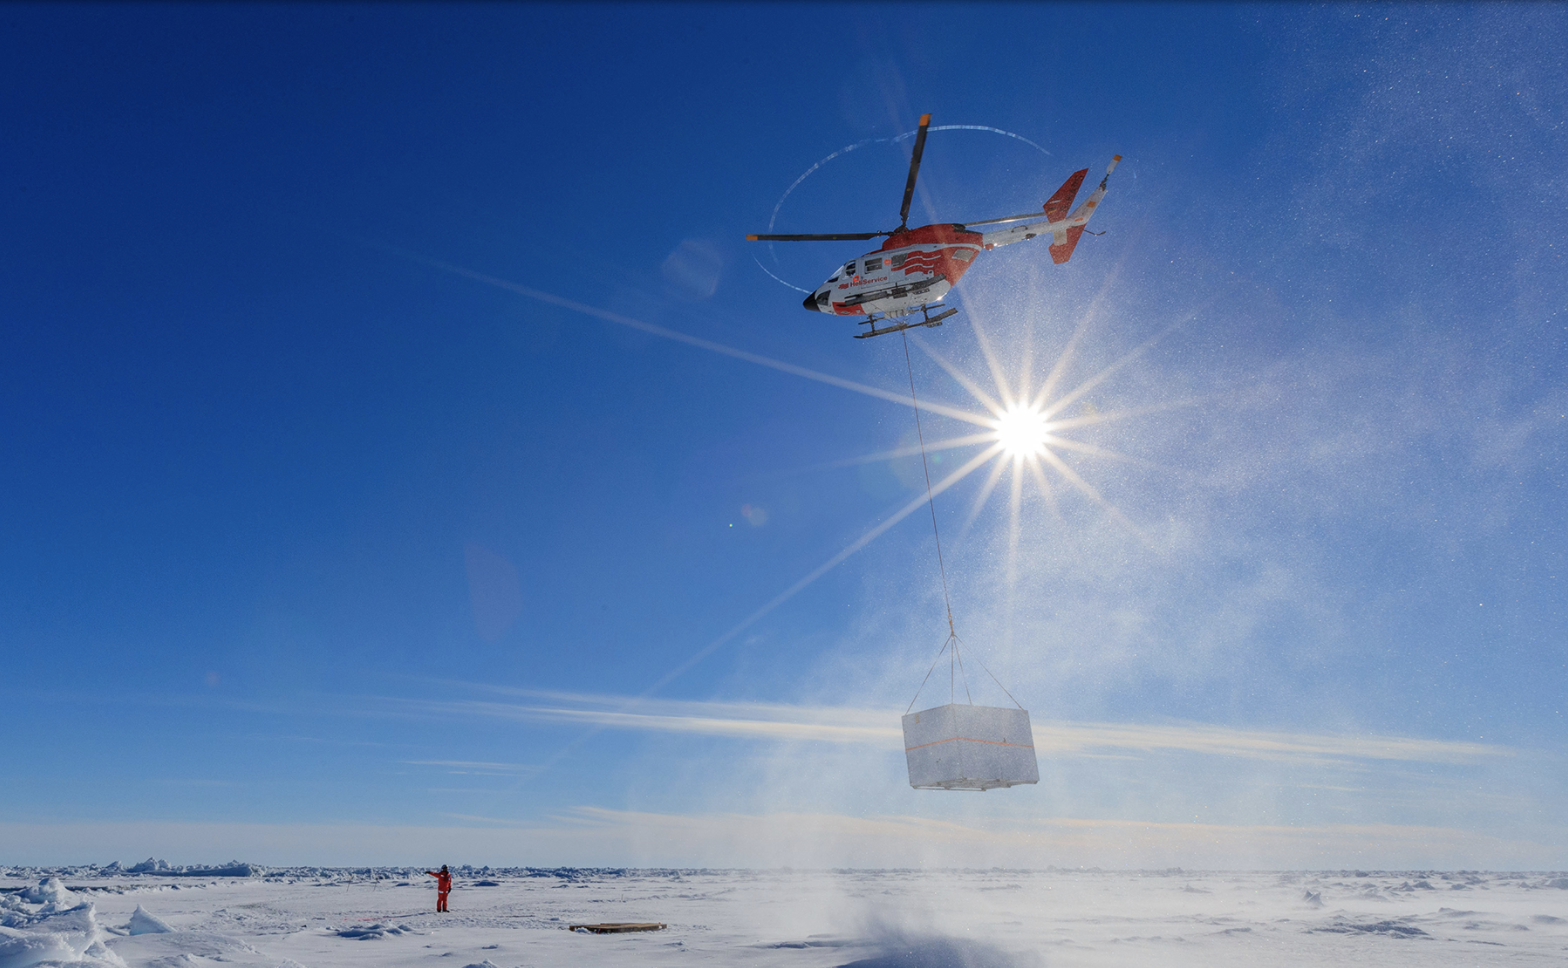 A helicopter is used to move heavy equipment around the ice.